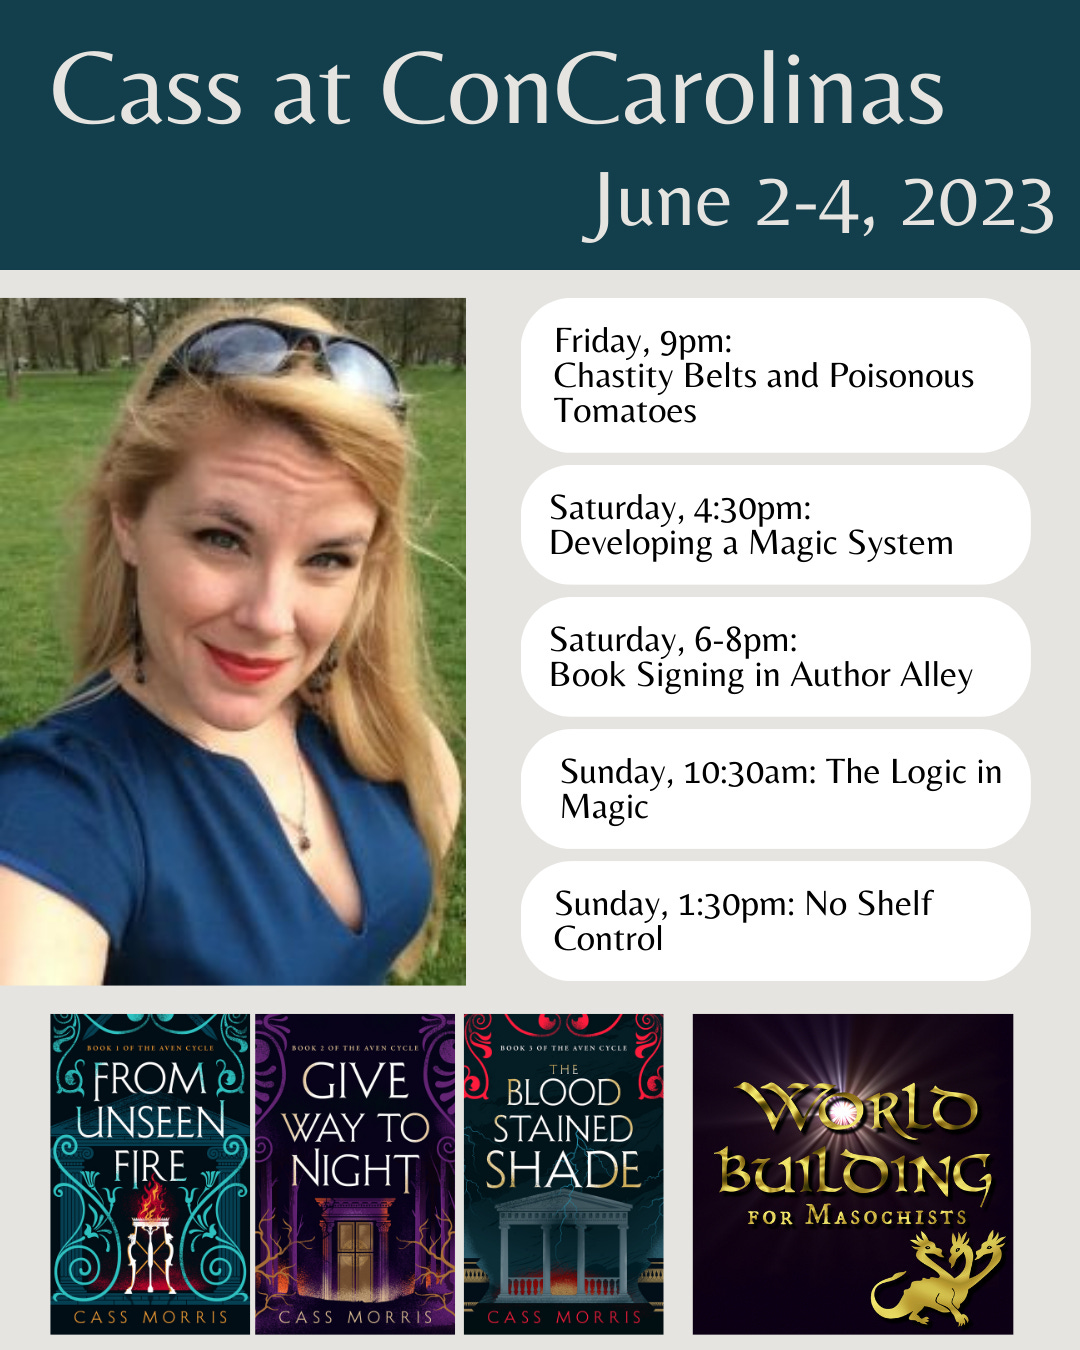 Header: white text on teal background: Cass at ConCarolinas June 2-4, 2023 | Below, picture of the author, a blonde woman in a teal dress with sunglasses pushed up on her head, next to a schedule: Friday 4:30pm: Chastity Belts and Poisonous Tomatoes, Saturday 4:30pm: Developing a Magic System, Saturday 6-8pm: Book Signing in Author Alley, Sunday 10:30am: The Logic in Magic, Sunday, 1:30pm: No Shelf Control | Beneath, images of covers of FROM UNSEEN FIRE, GIVE WAY TO NIGHT, and THE BLOODSTAINED SHADE, with the show logo for Worldbuilding for Masochists